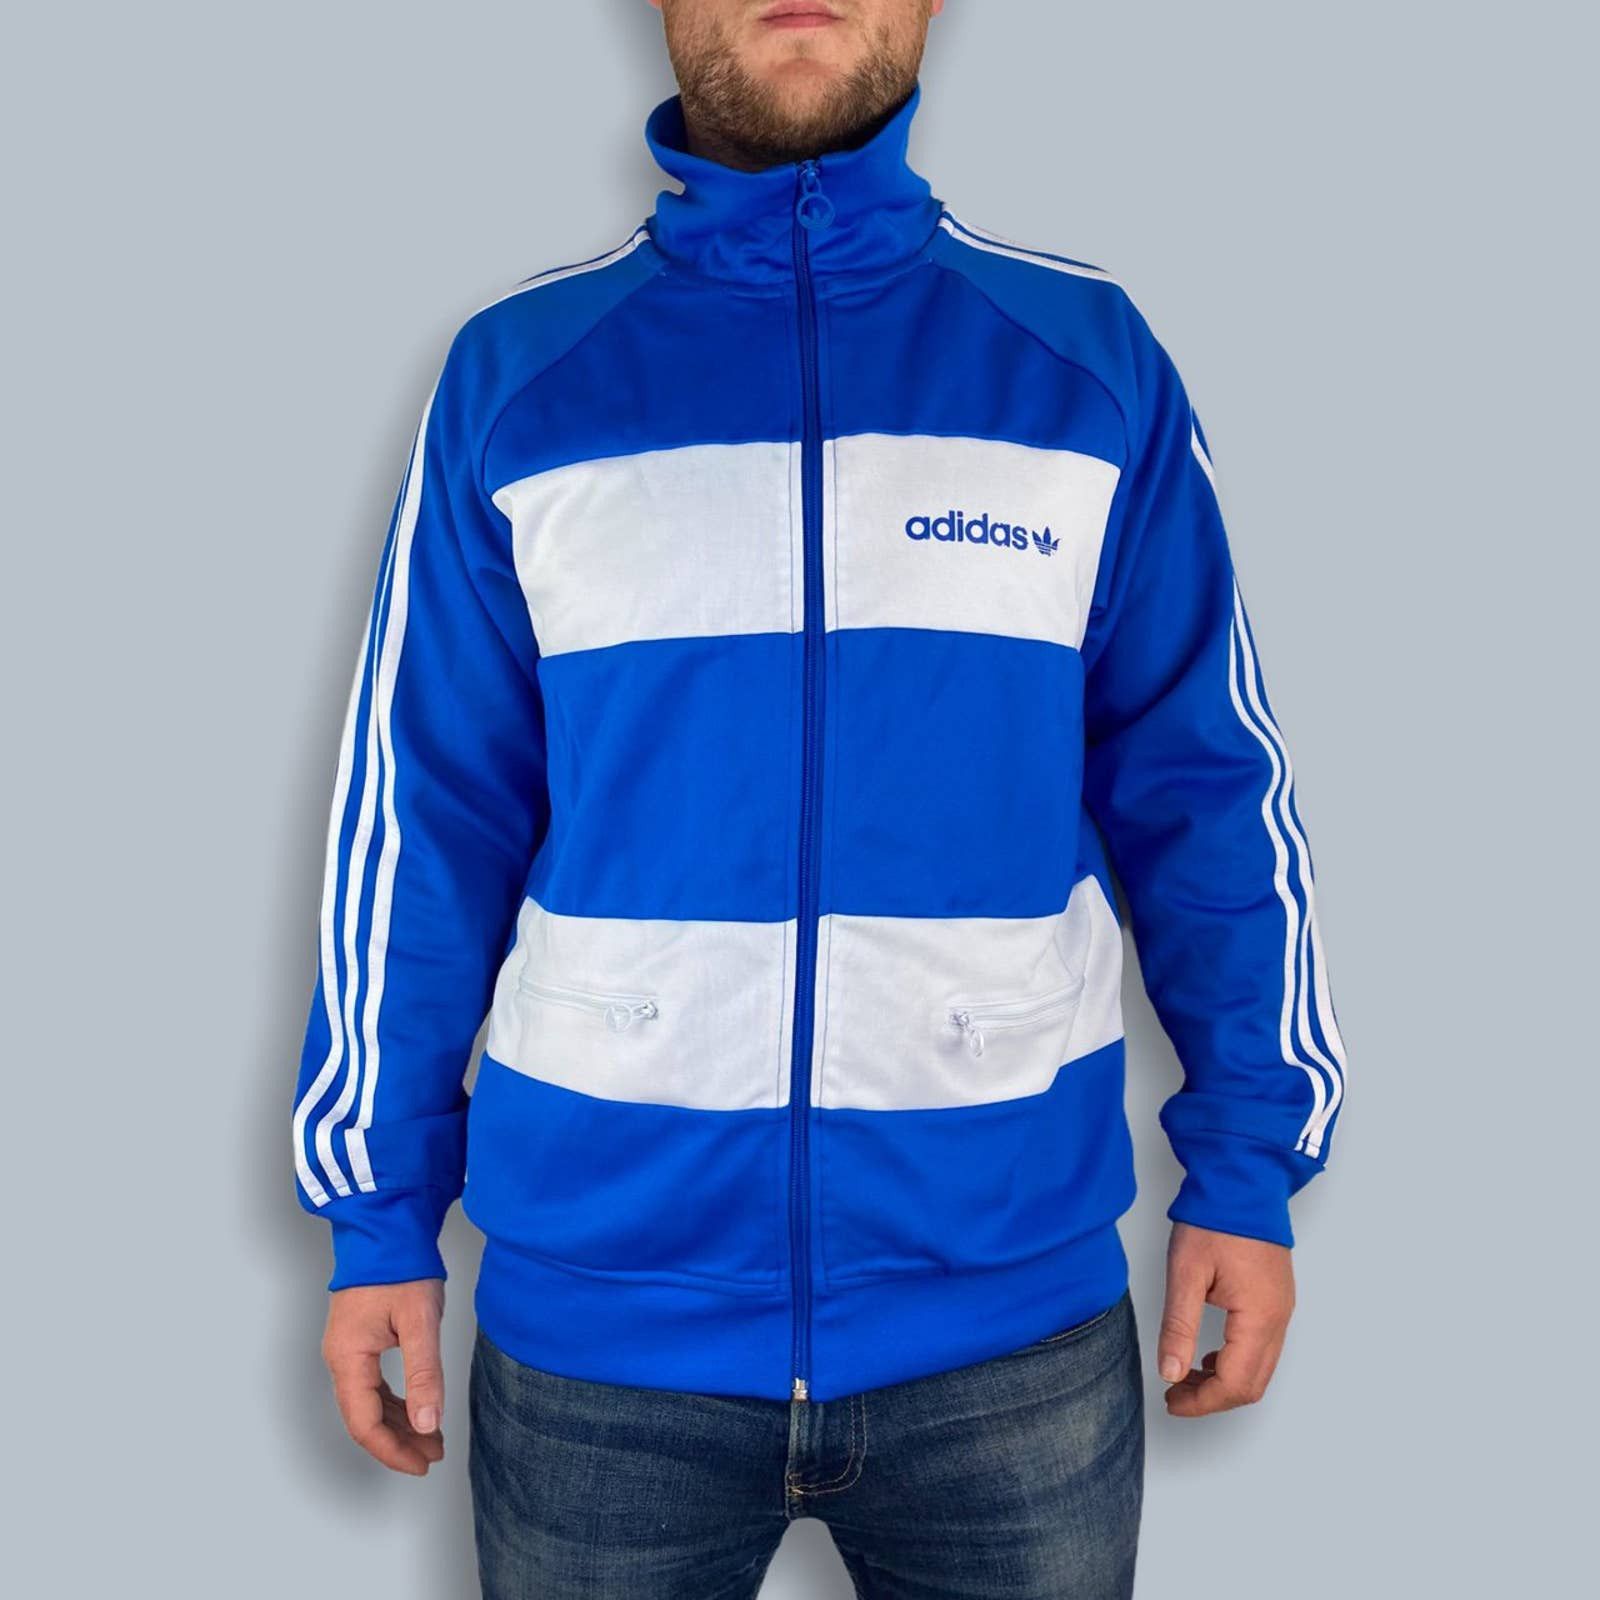 Adidas Retro Blue and White Striped Adidas Zip-up Sweater (M) Size US M / EU 48-50 / 2 - 1 Preview